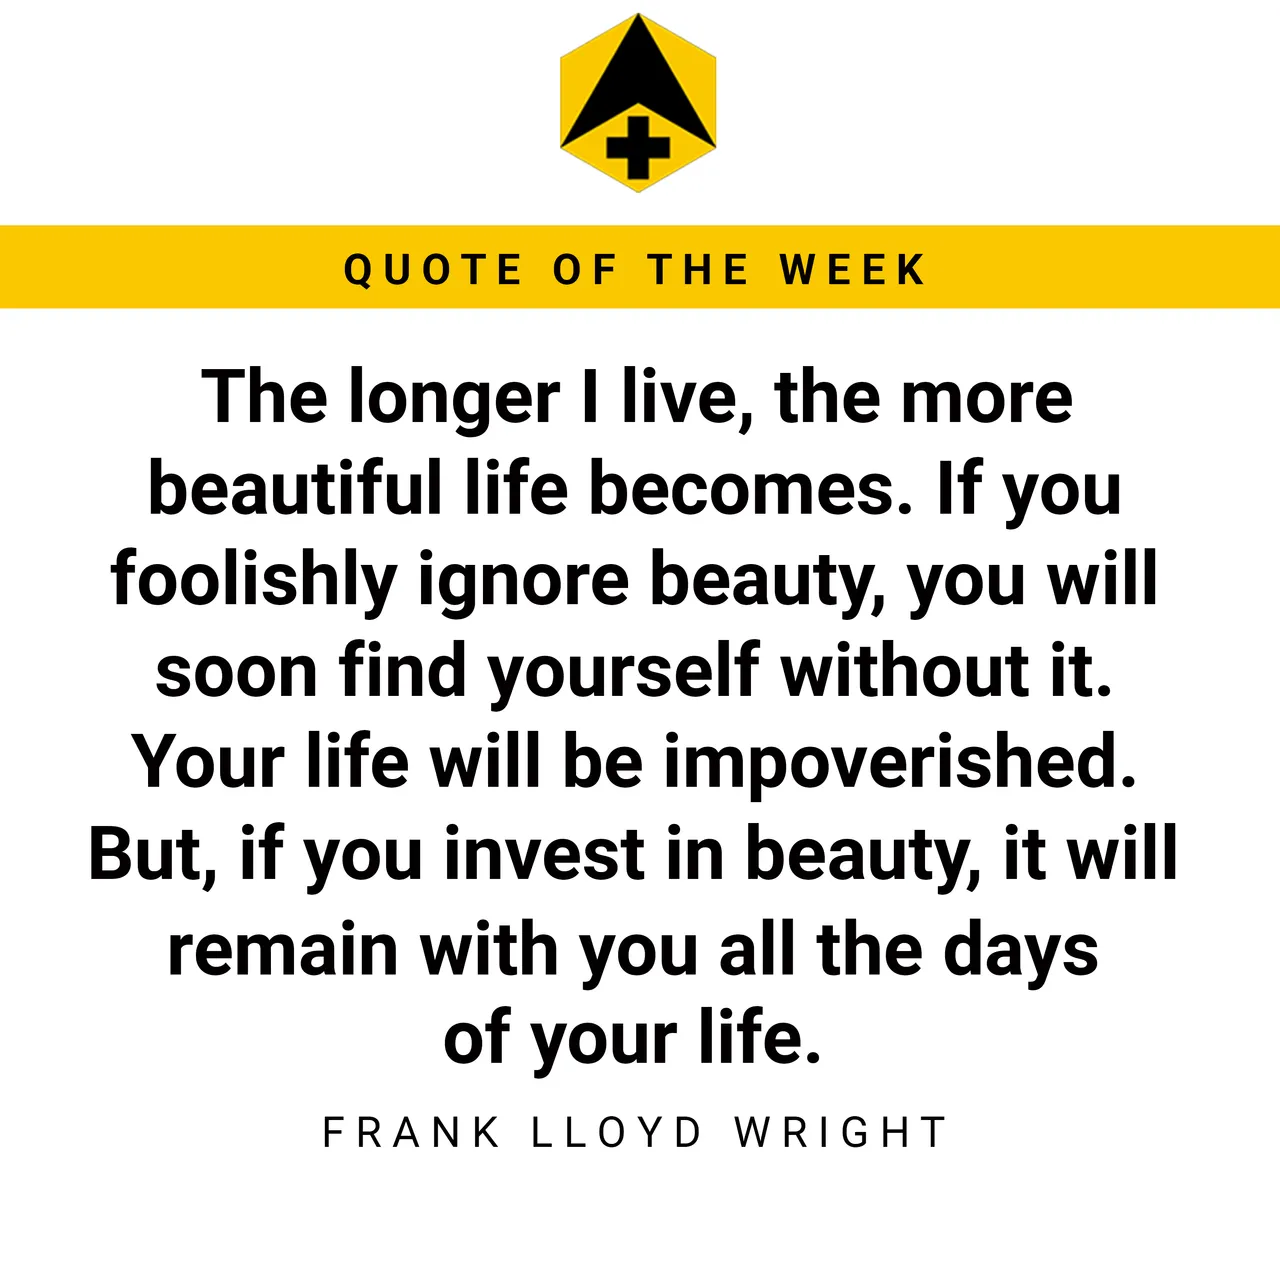 2021-09-14 AB 38 QUOTE OF THE WEEK.png